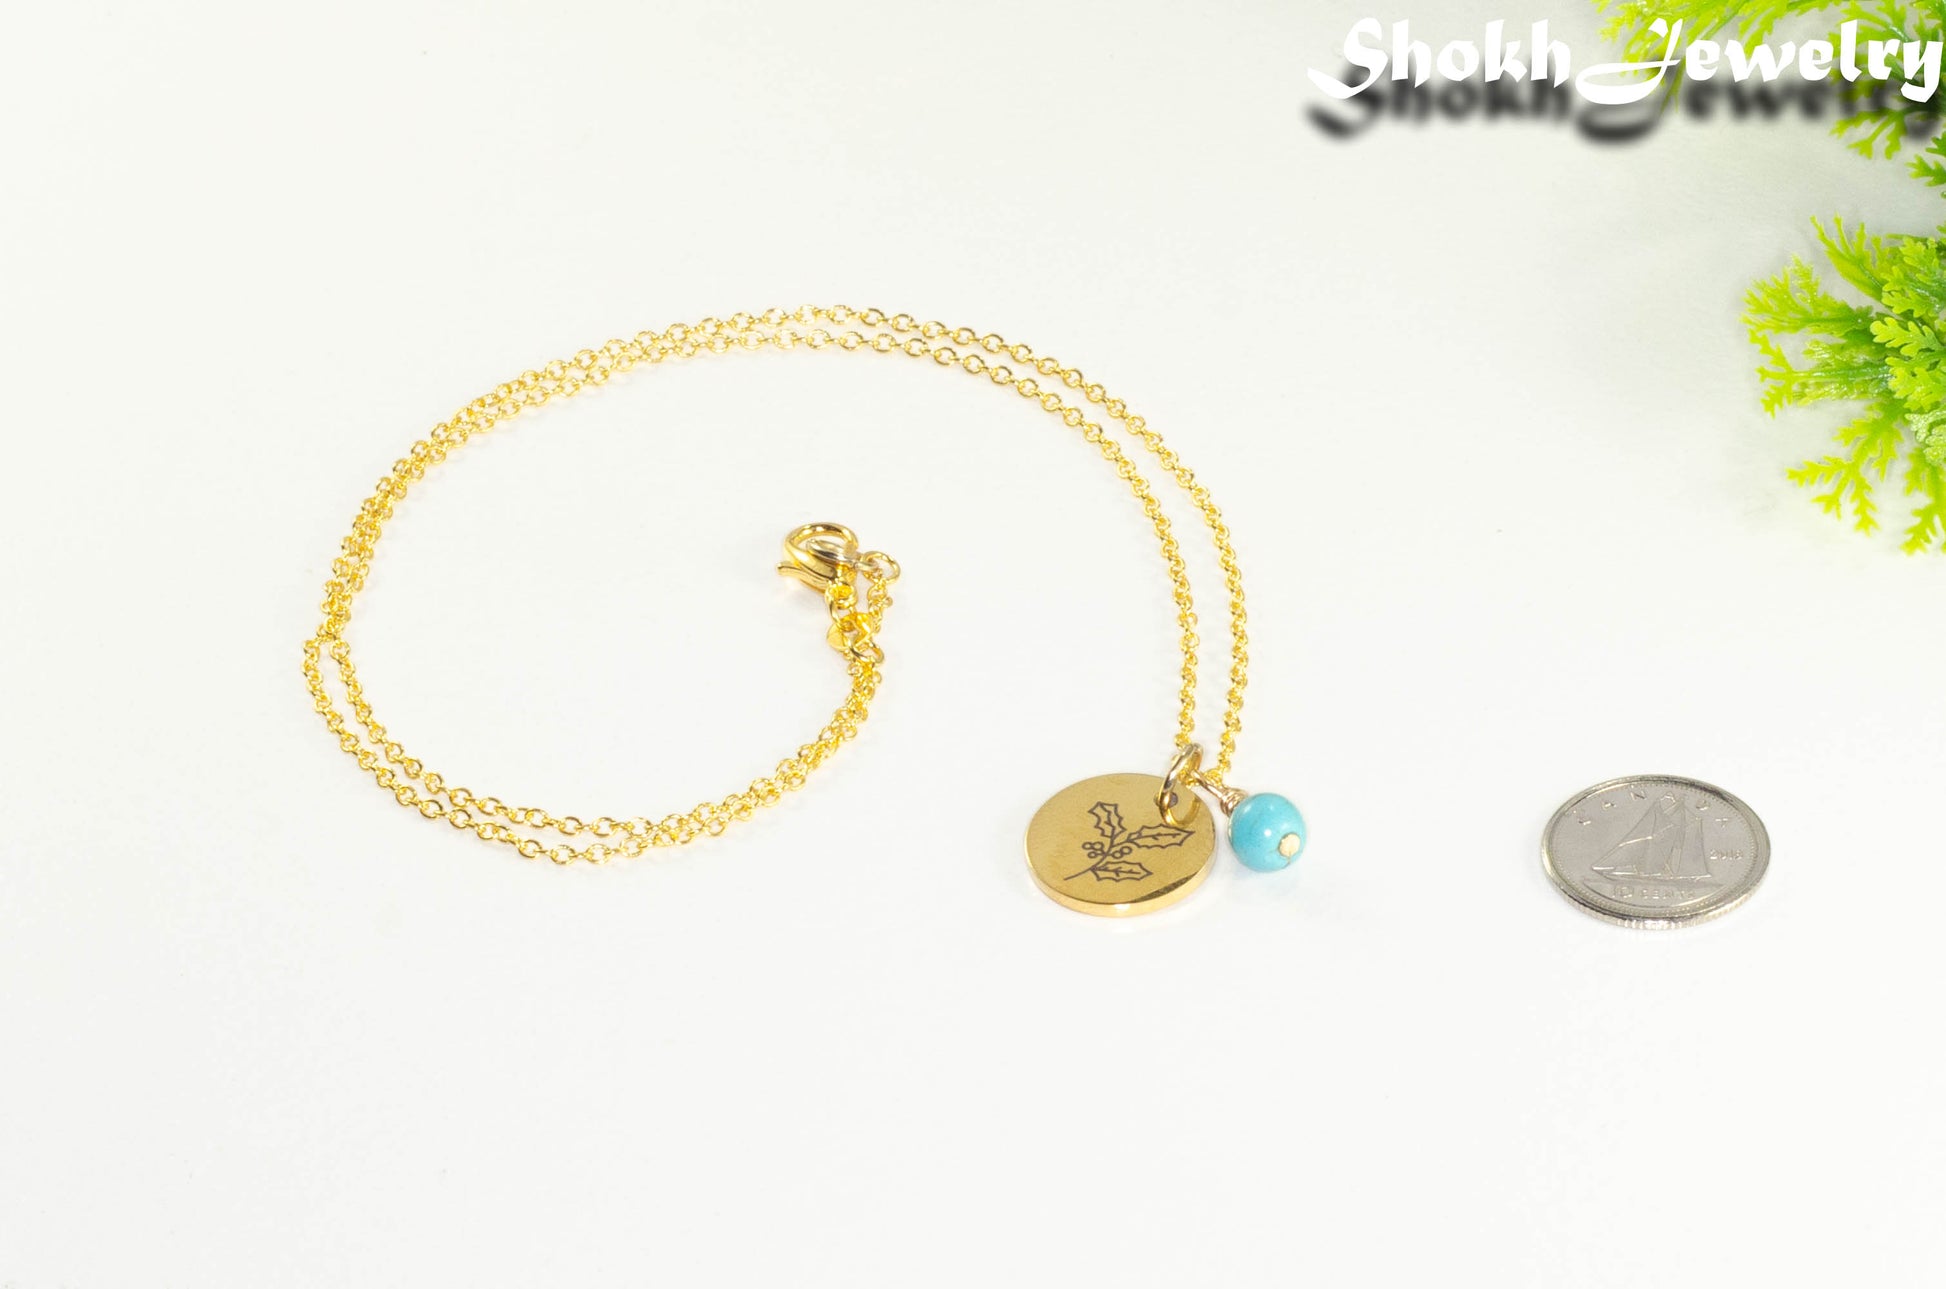 Gold Plated December Birth Flower Necklace with Turquoise Howlite Birthstone Pendant beside a dime.